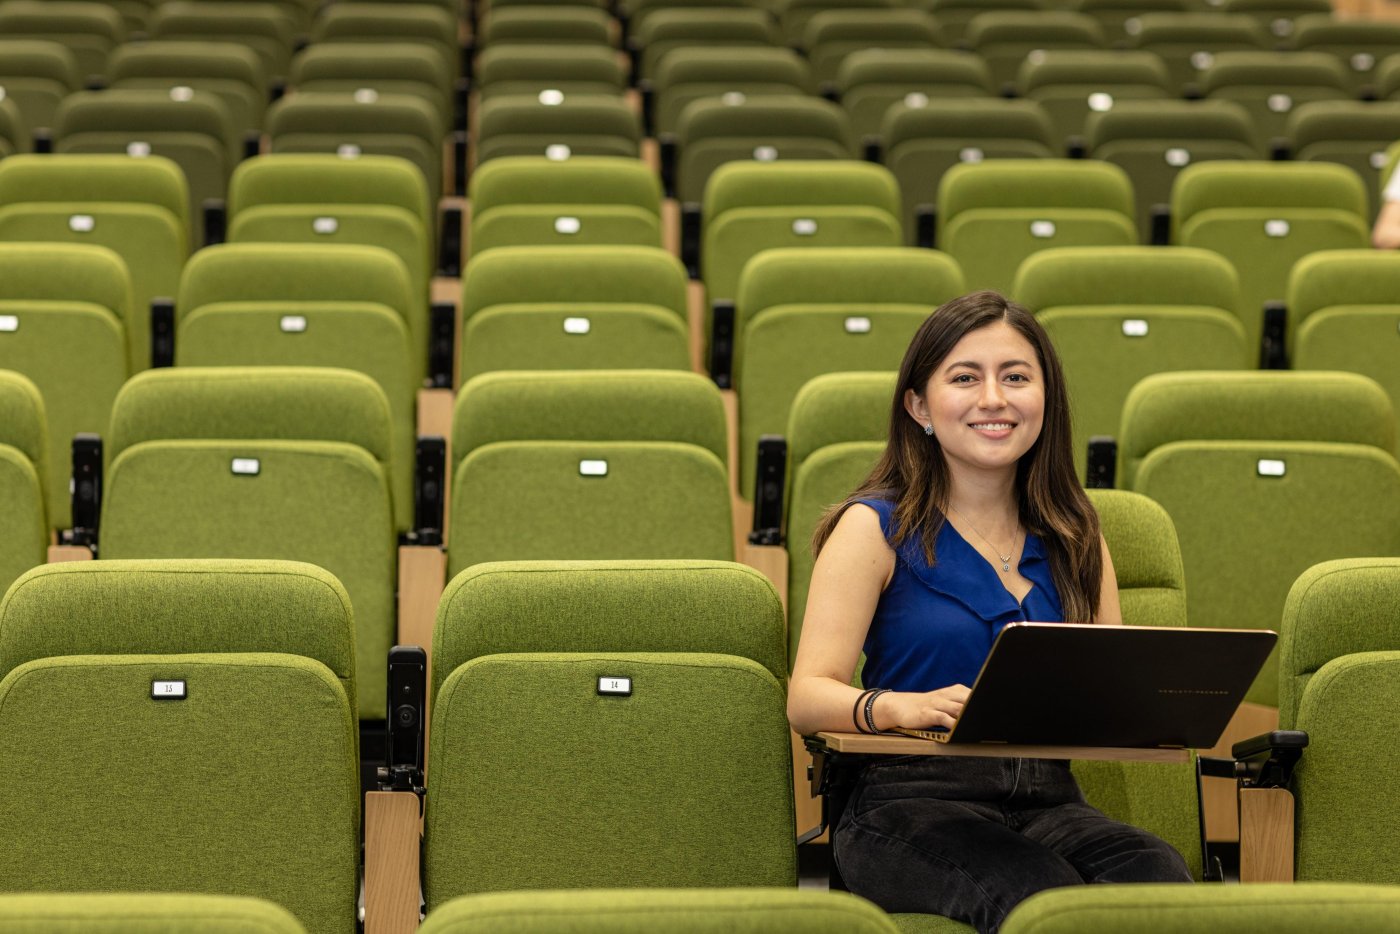 Student sitting at laptop in tiered lecture theatre with green seats.